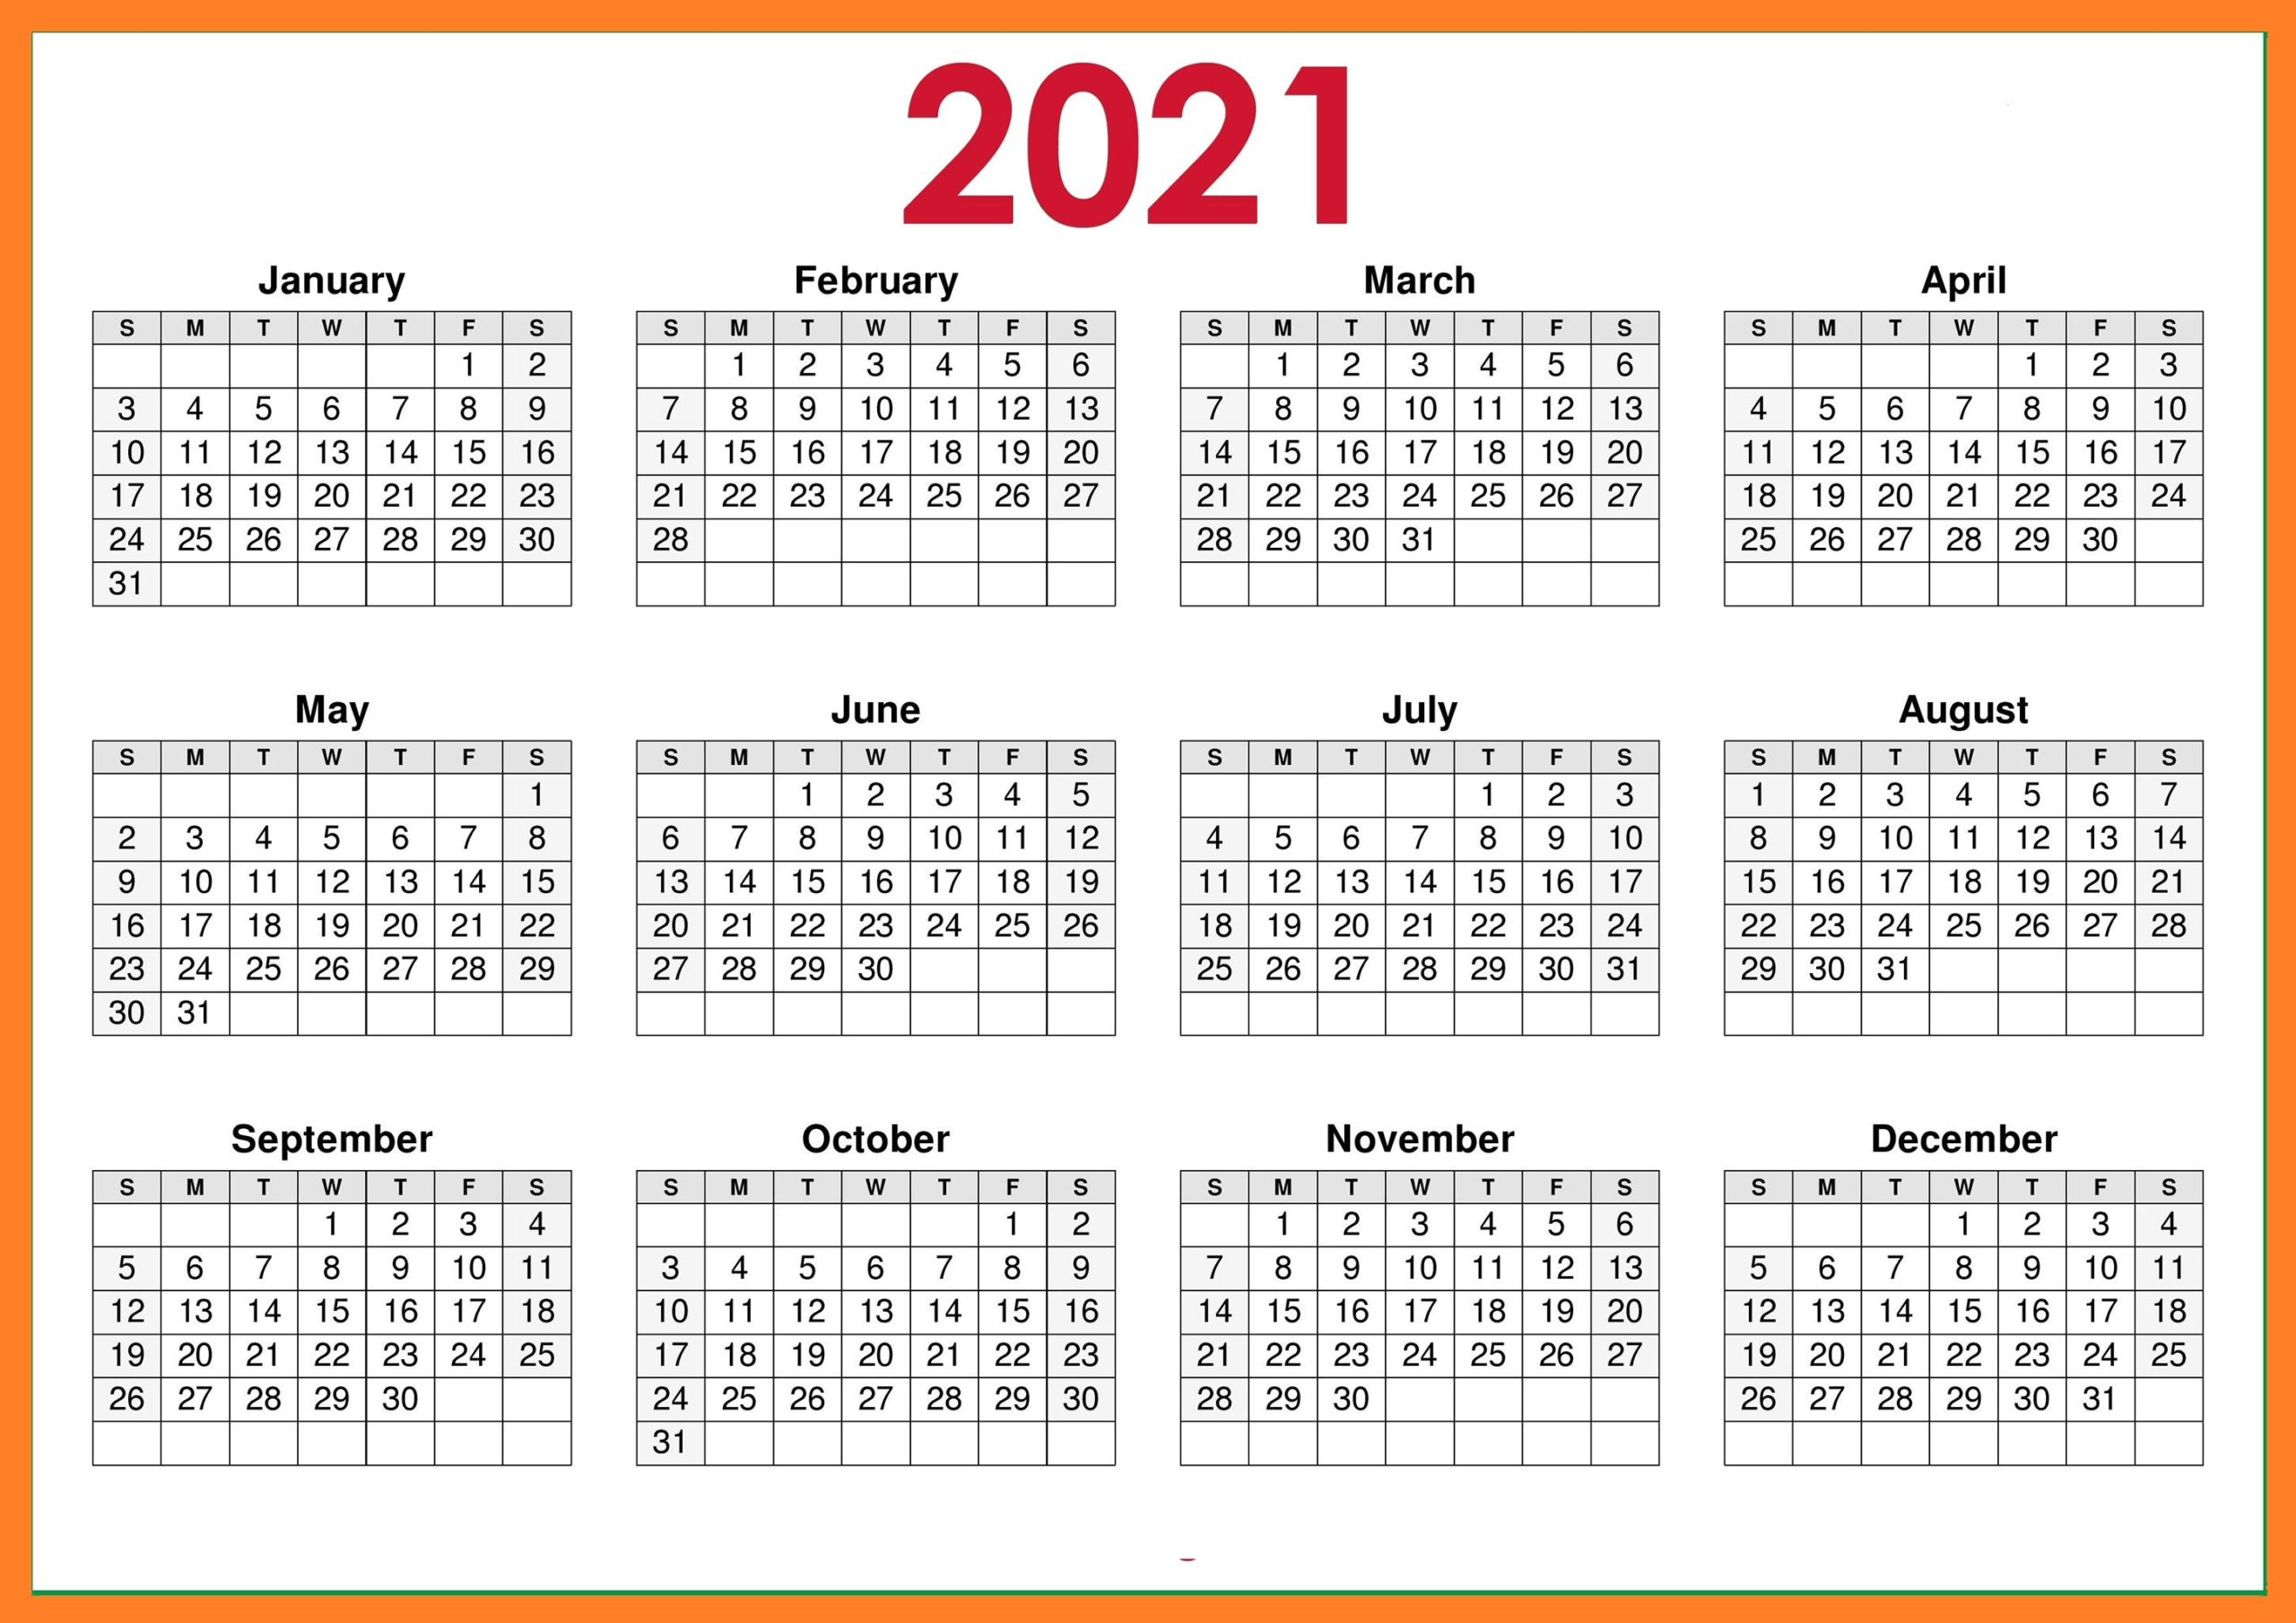 Free 2021 Yearly Calender Template : Calendar 2021